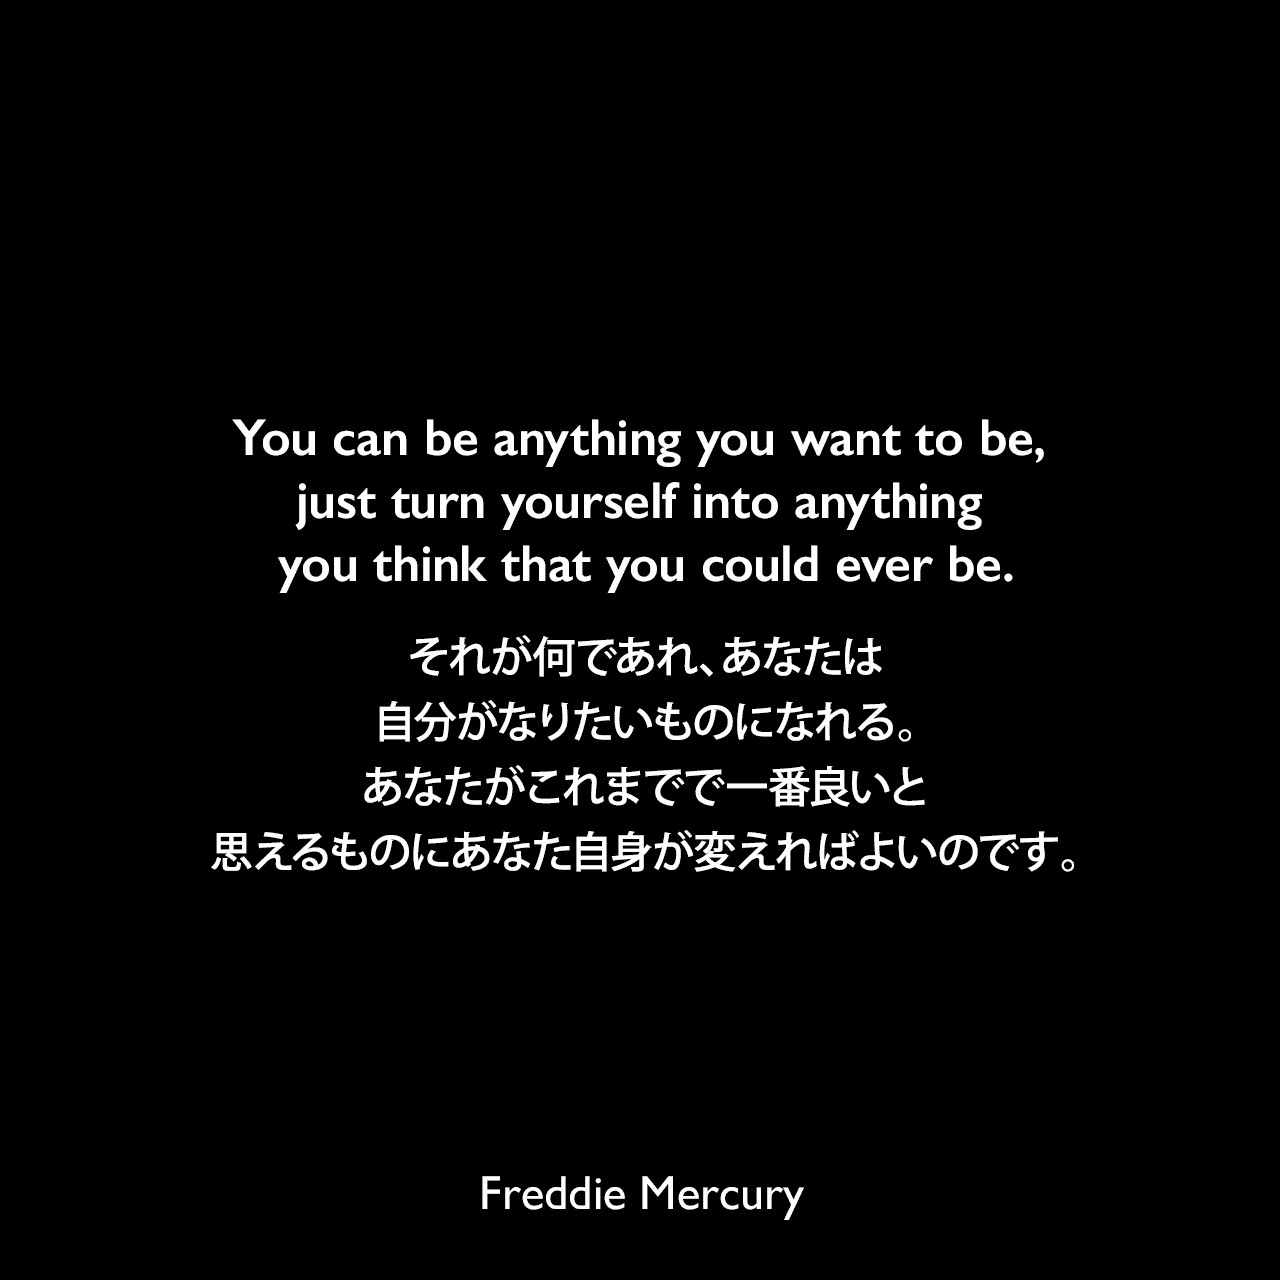 You can be anything you want to be, just turn yourself into anything you think that you could ever be.それが何であれ、あなたは自分がなりたいものになれる。あなたがこれまでで一番良いと思えるものにあなた自身が変えればよいのです。Freddie Mercury